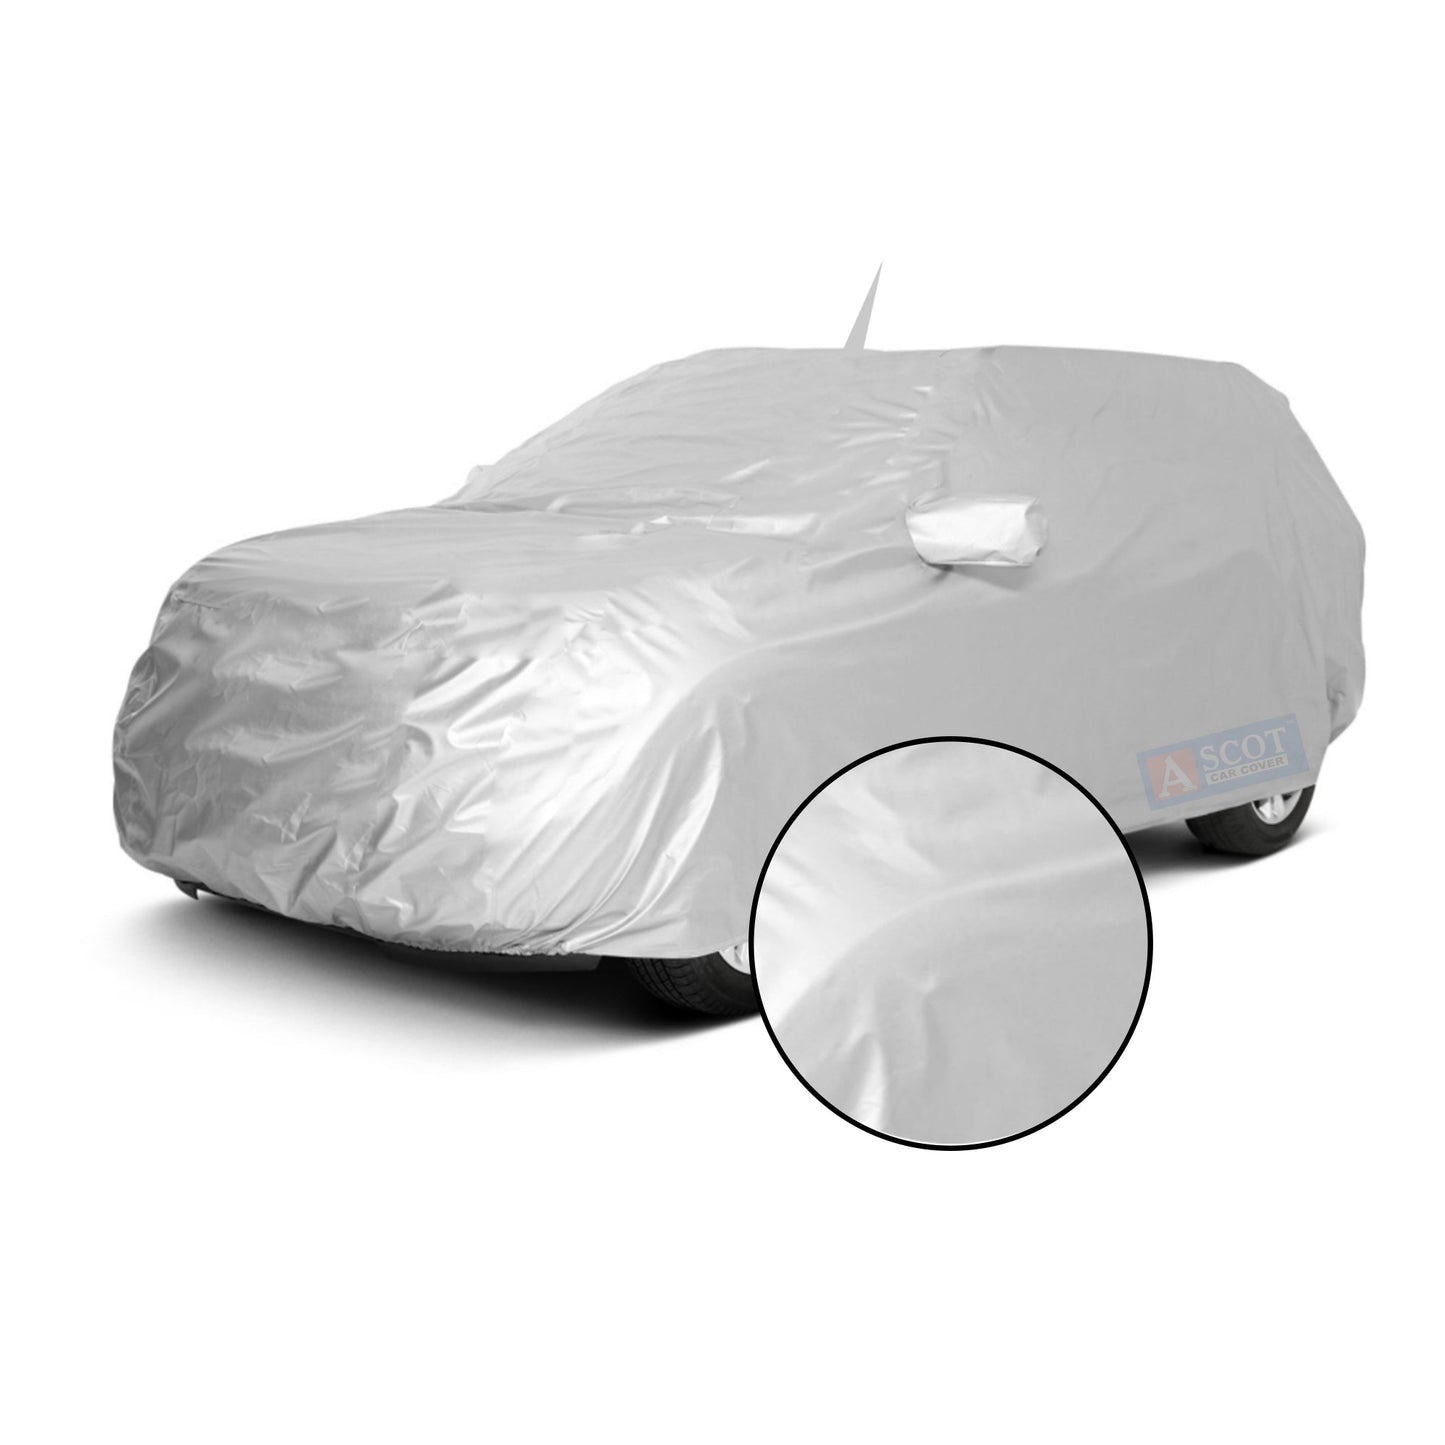 Ascot Audi RS 5 Sportback 2018-2024 Model Car Body Cover Dust Proof, Trippel Stitched